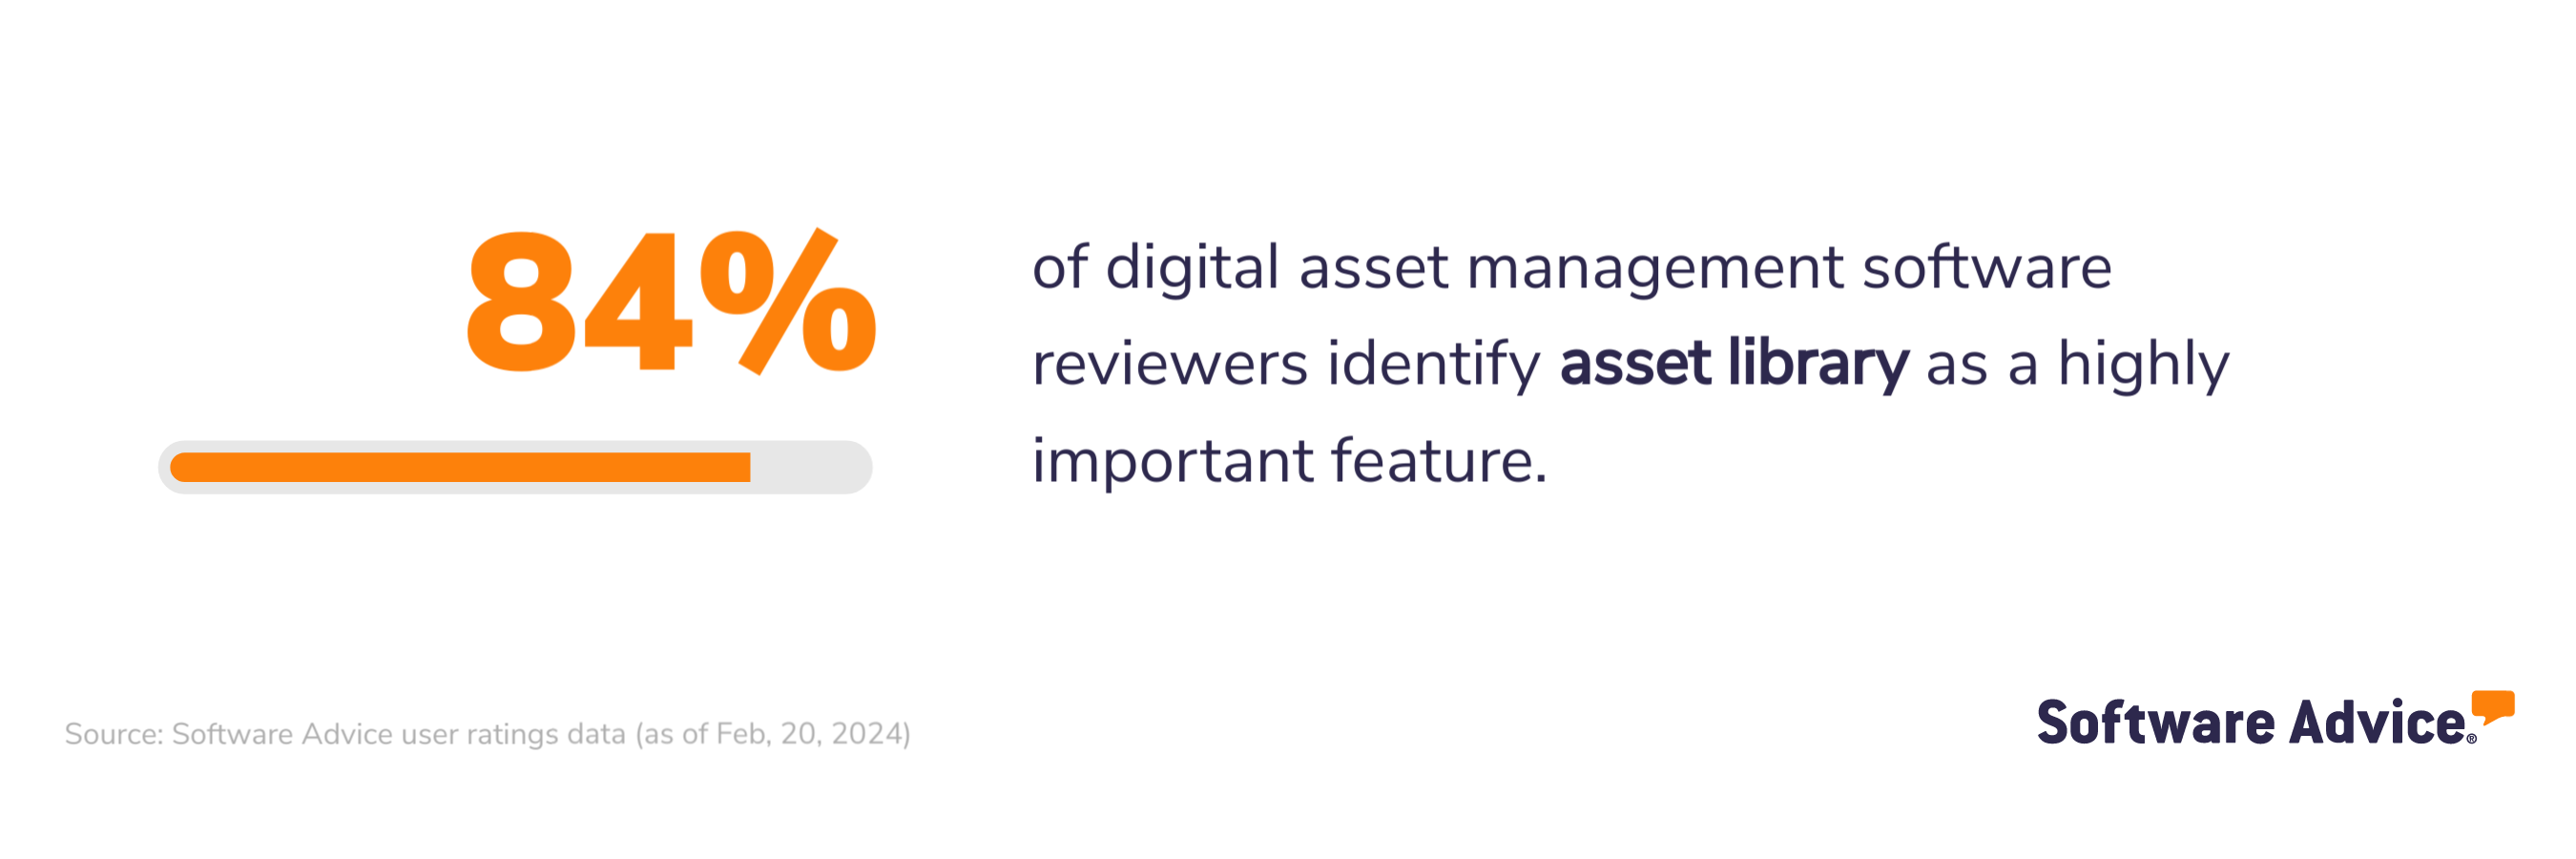 84% of digital asset management software reviewers identify asset library as a highly important feature.